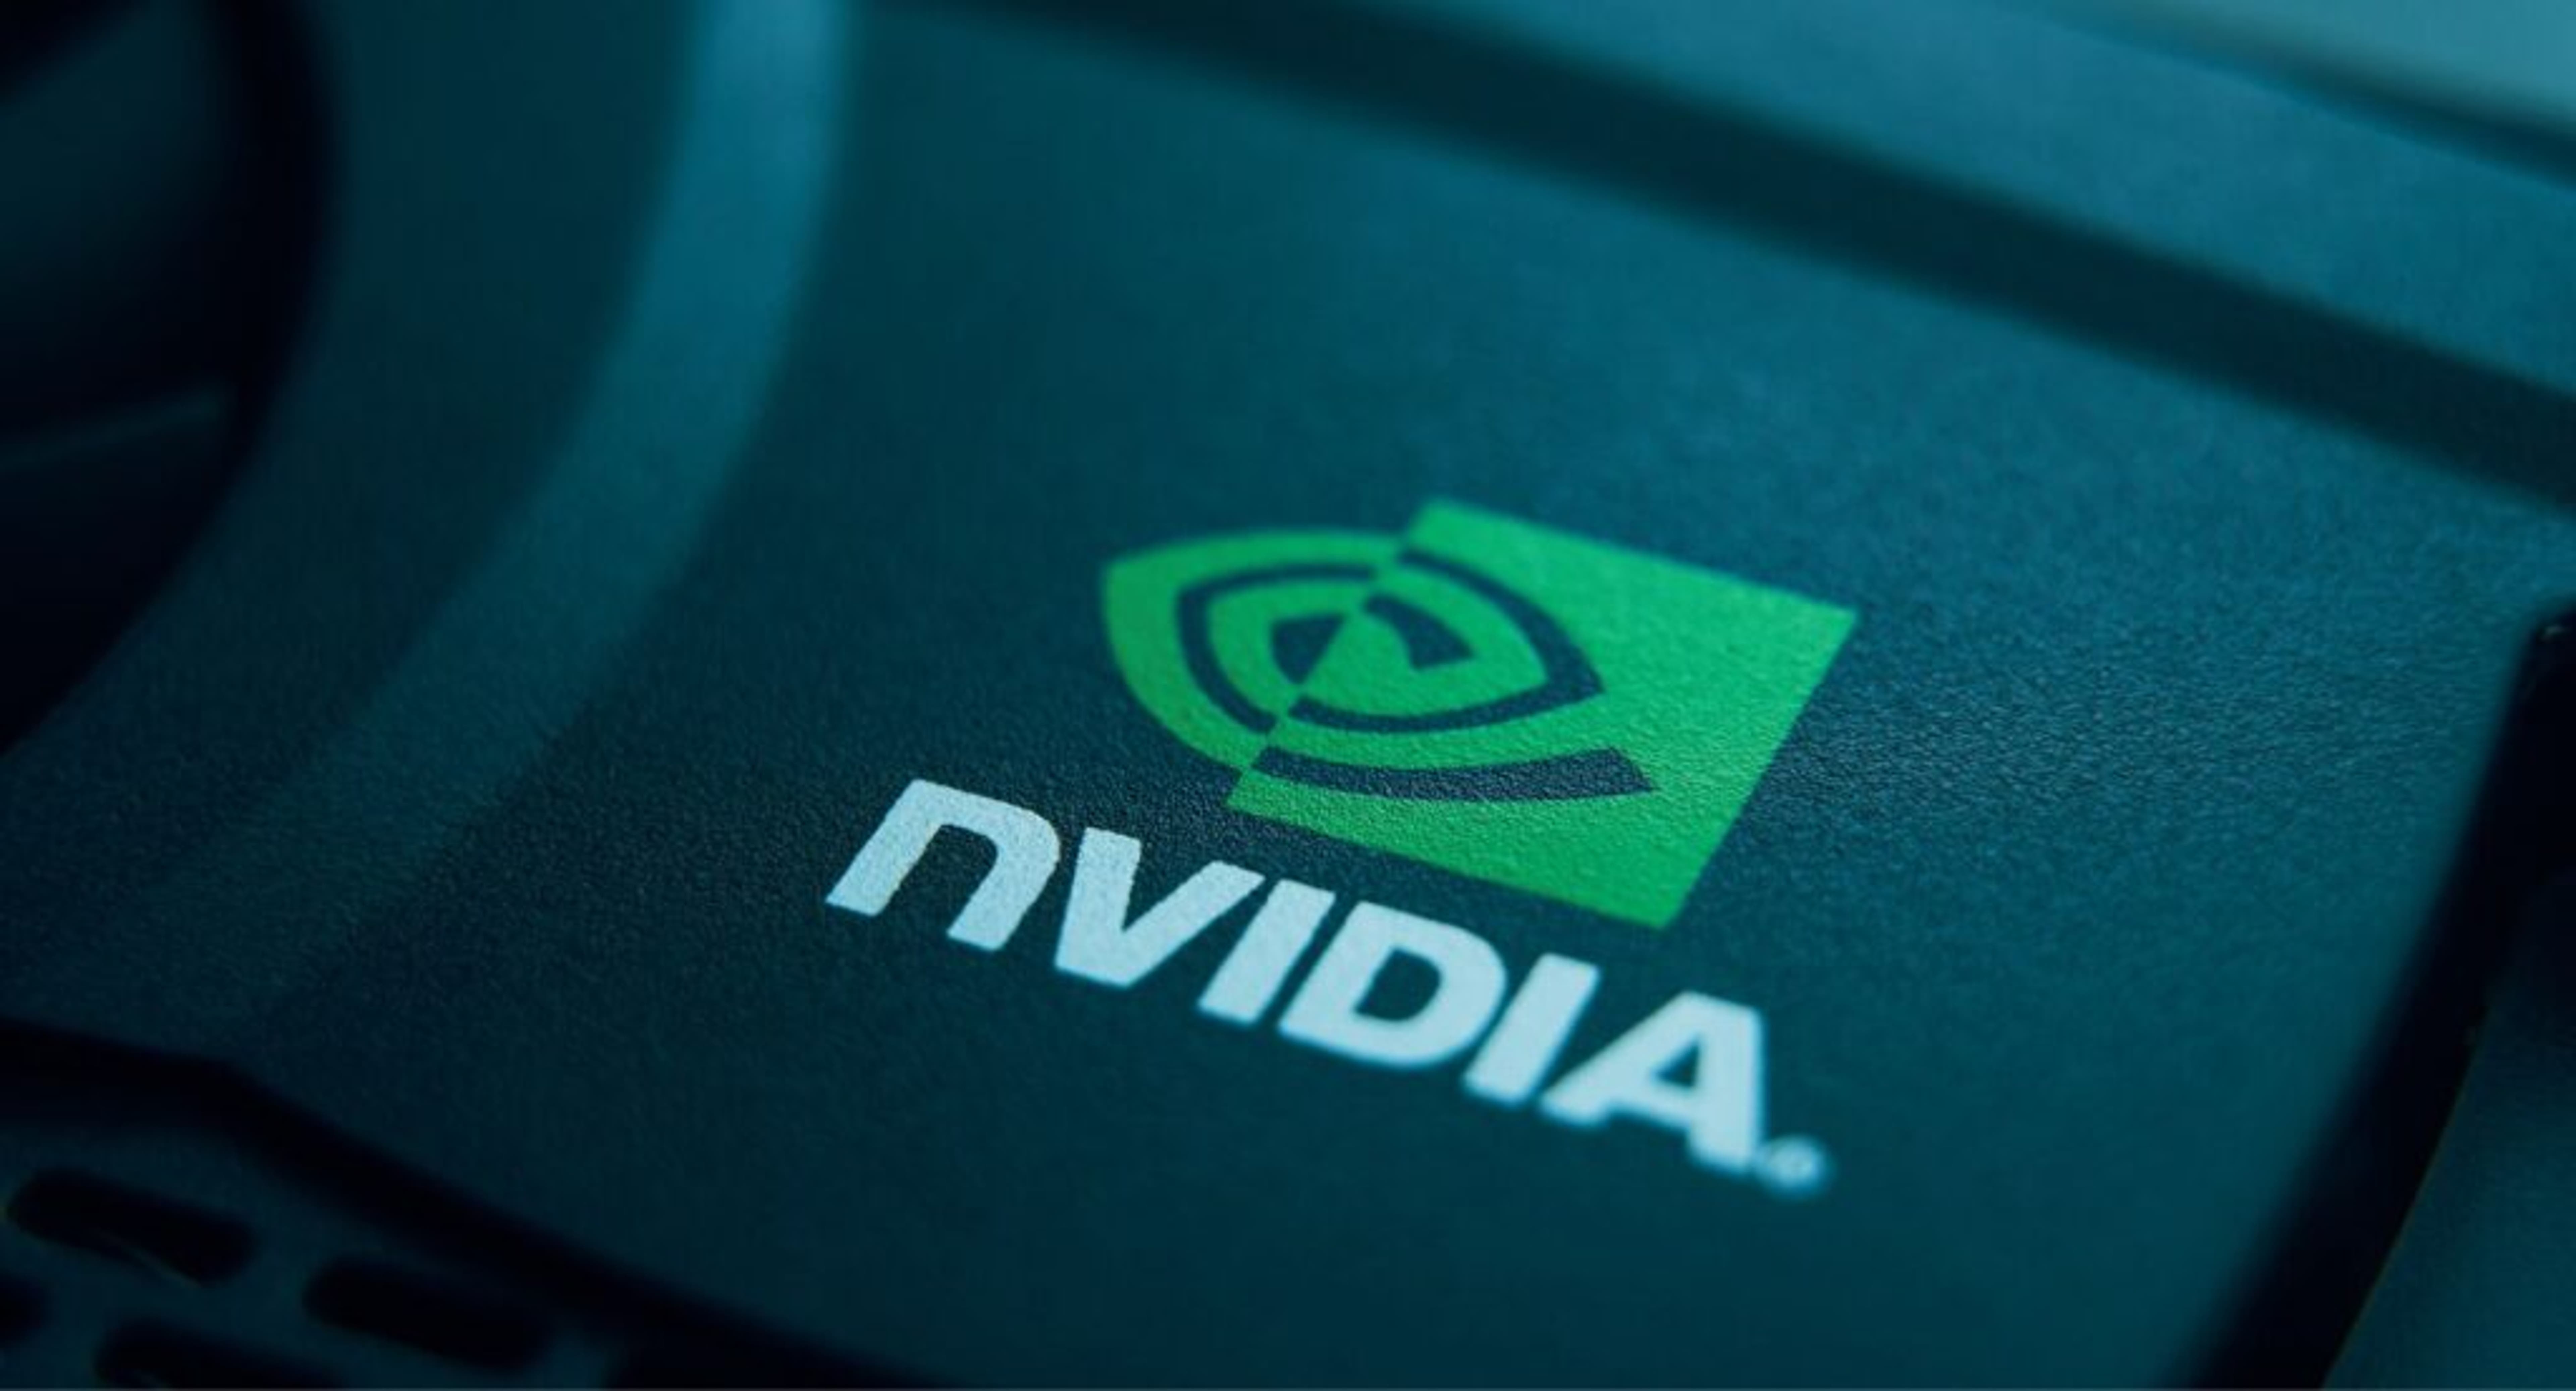 Munster Says Nvidia&#39;s Q2 Triumph Outshines Apple&#39;s Glory Days, Q3 Guidance &#39;Lights-Out-Good&#39;